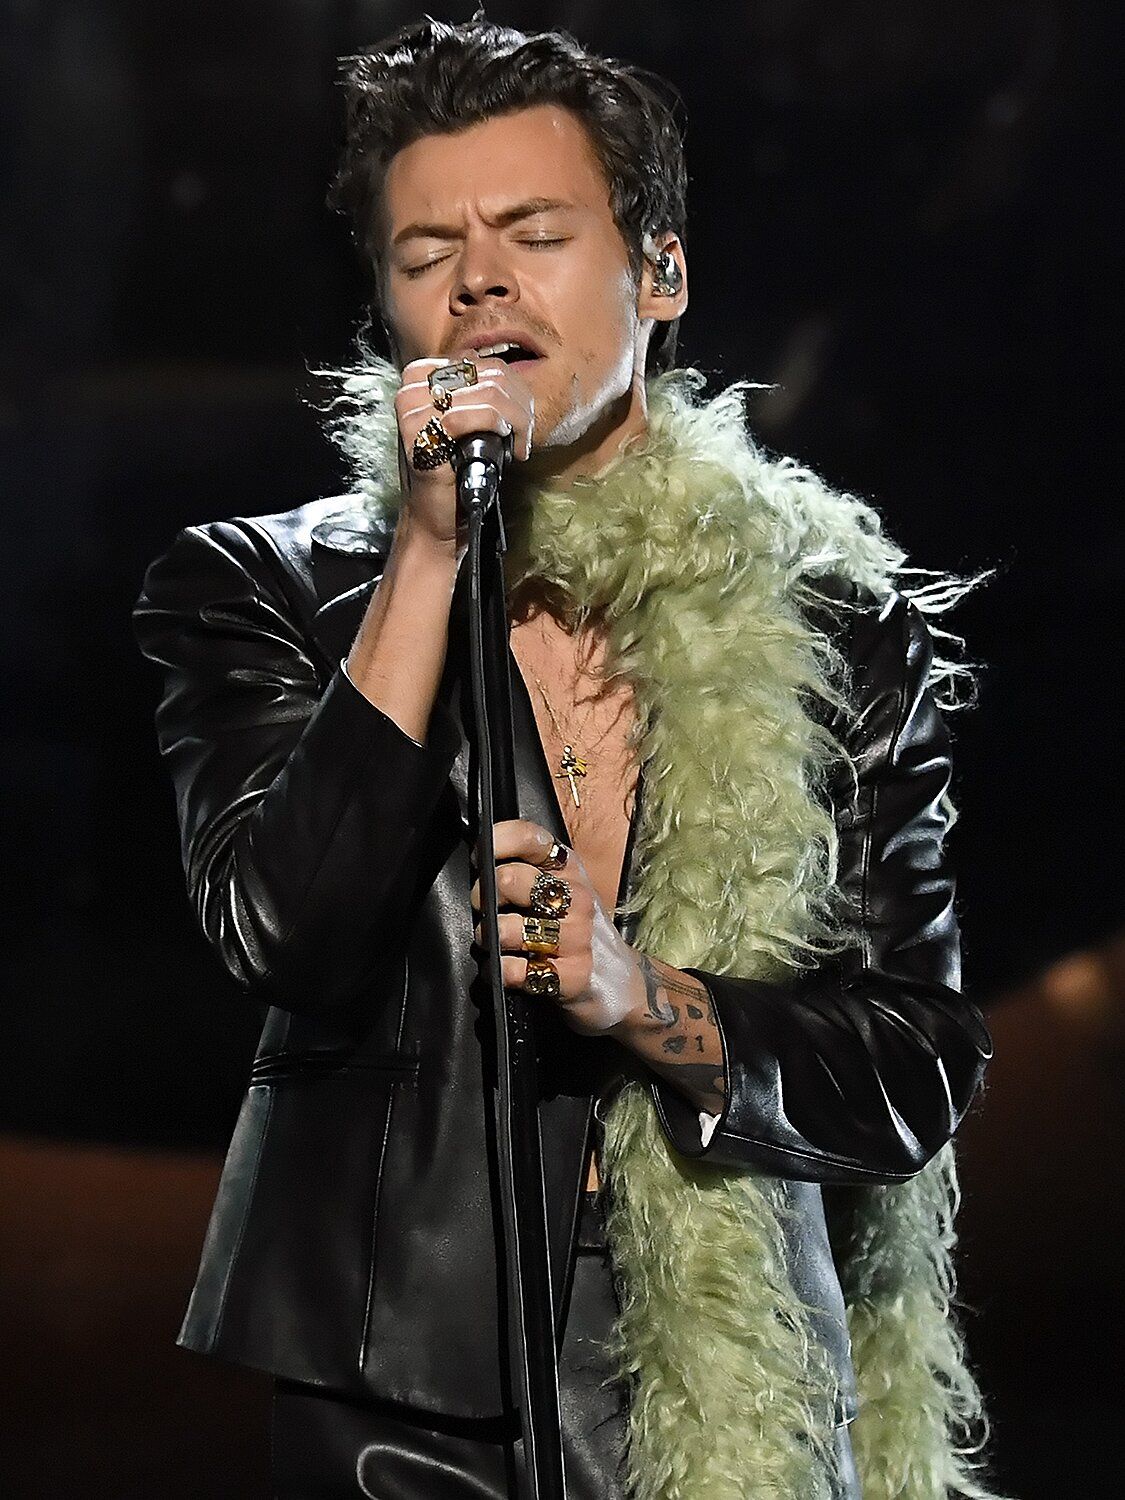 Harry Styles Photo from the 2021 Grammys